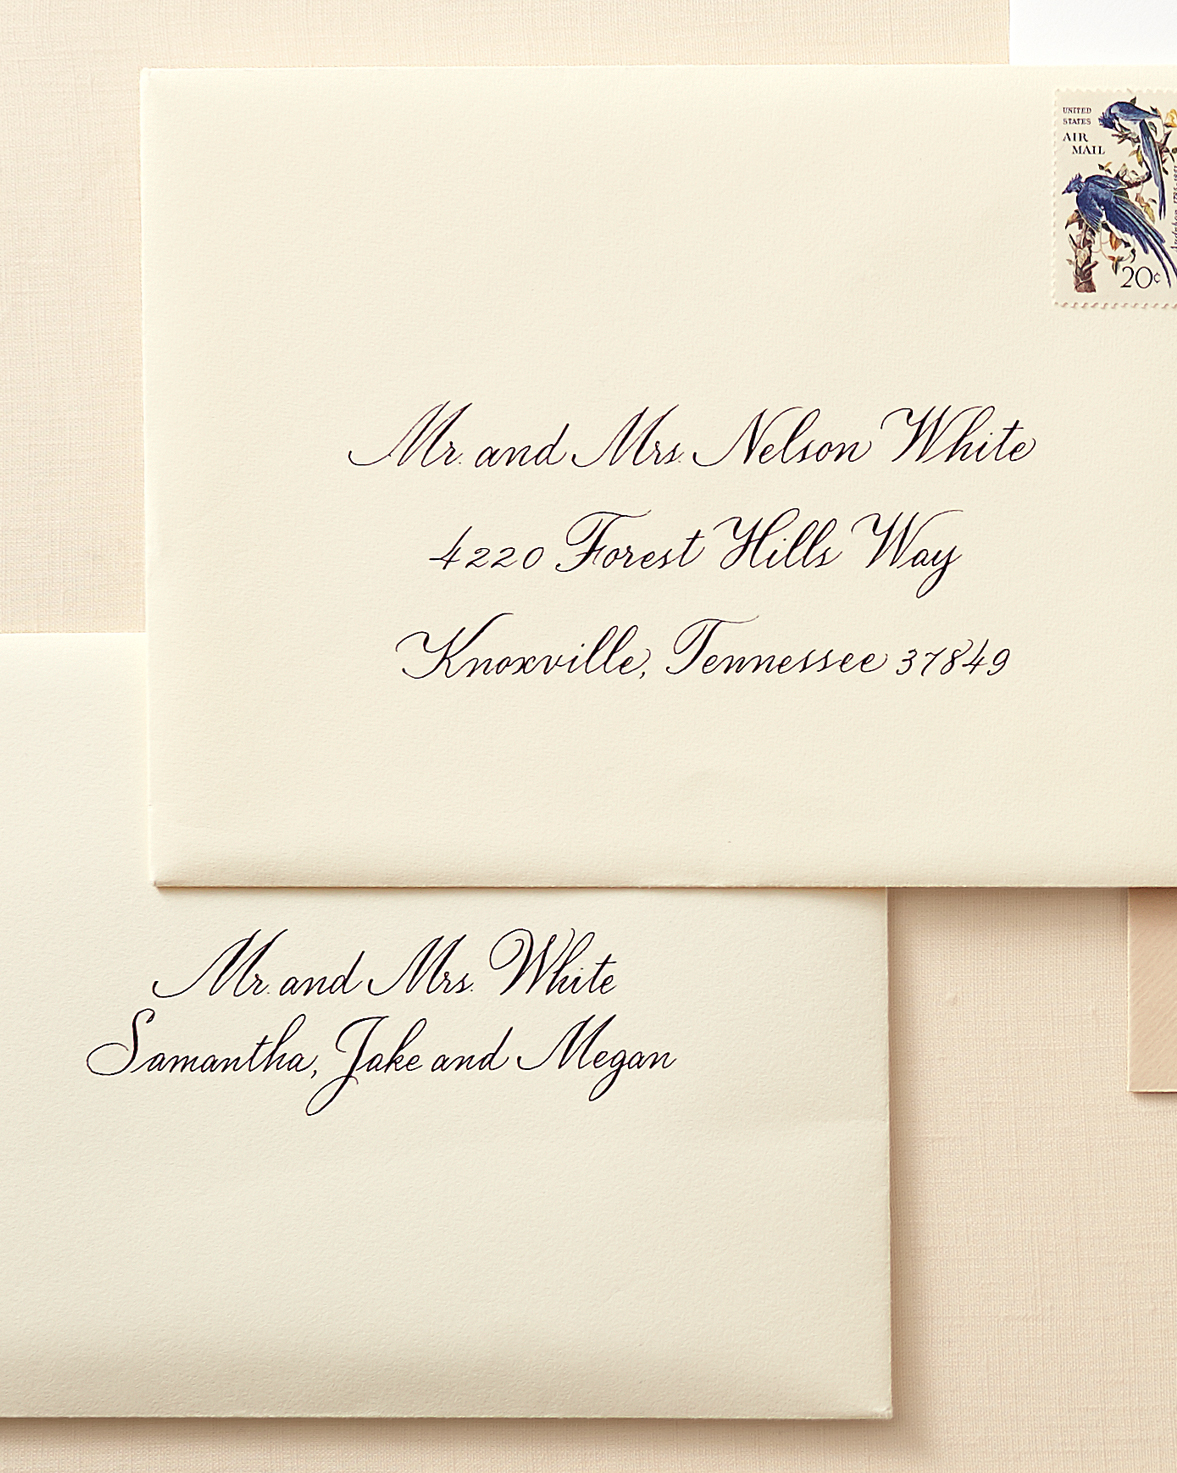 Proper Way To Address An Envelope To A Married Couple How to Address